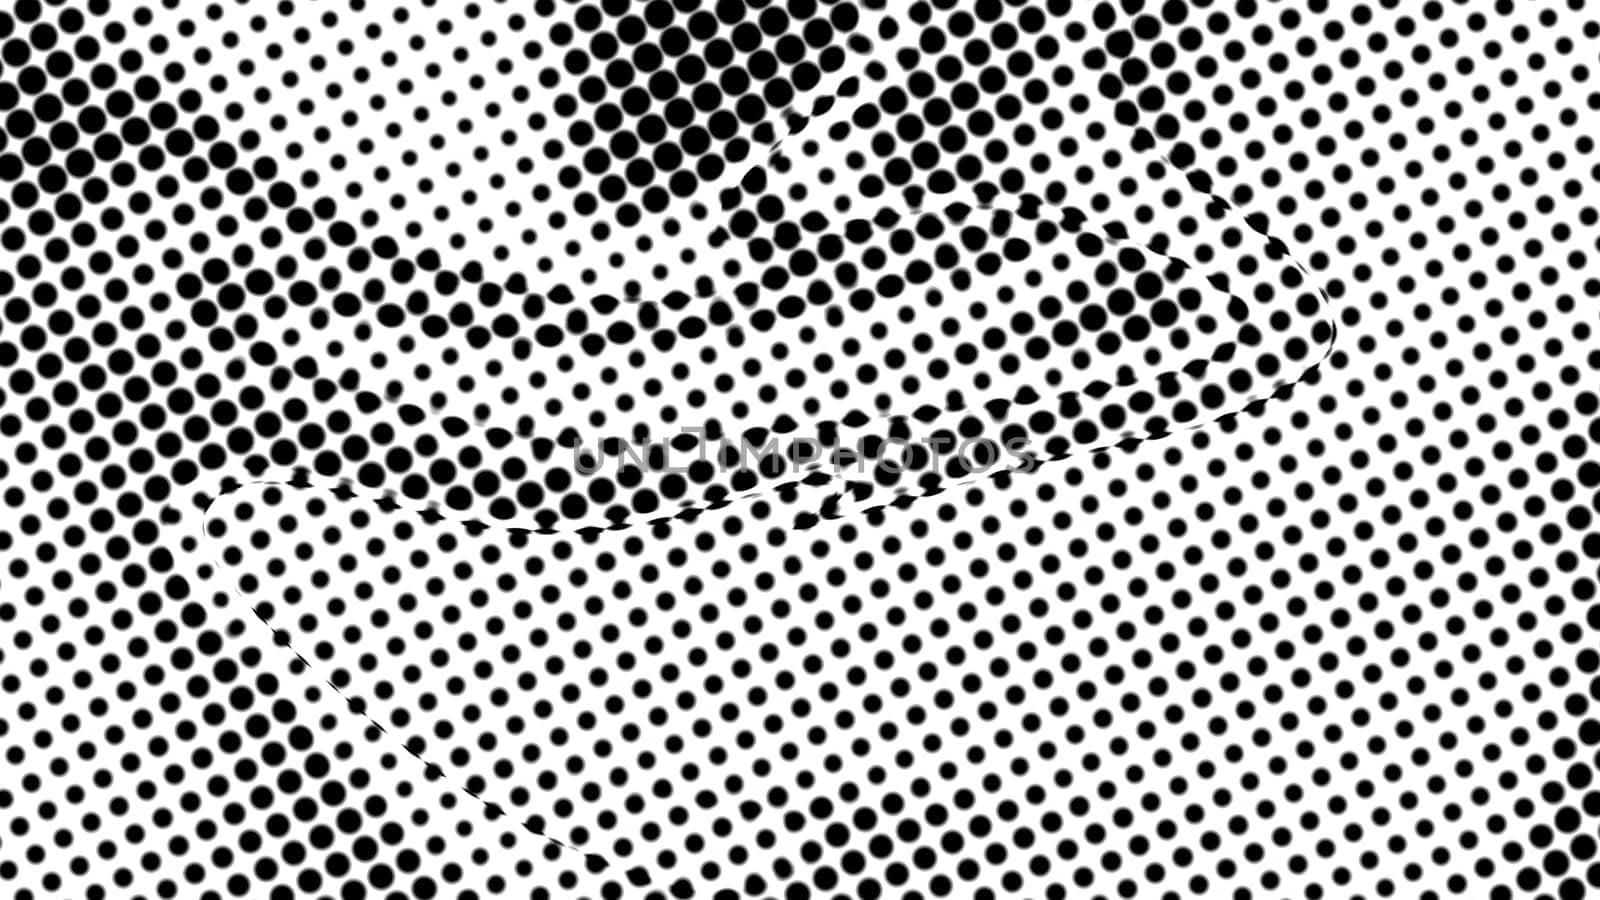 Black and white halftone by nolimit046